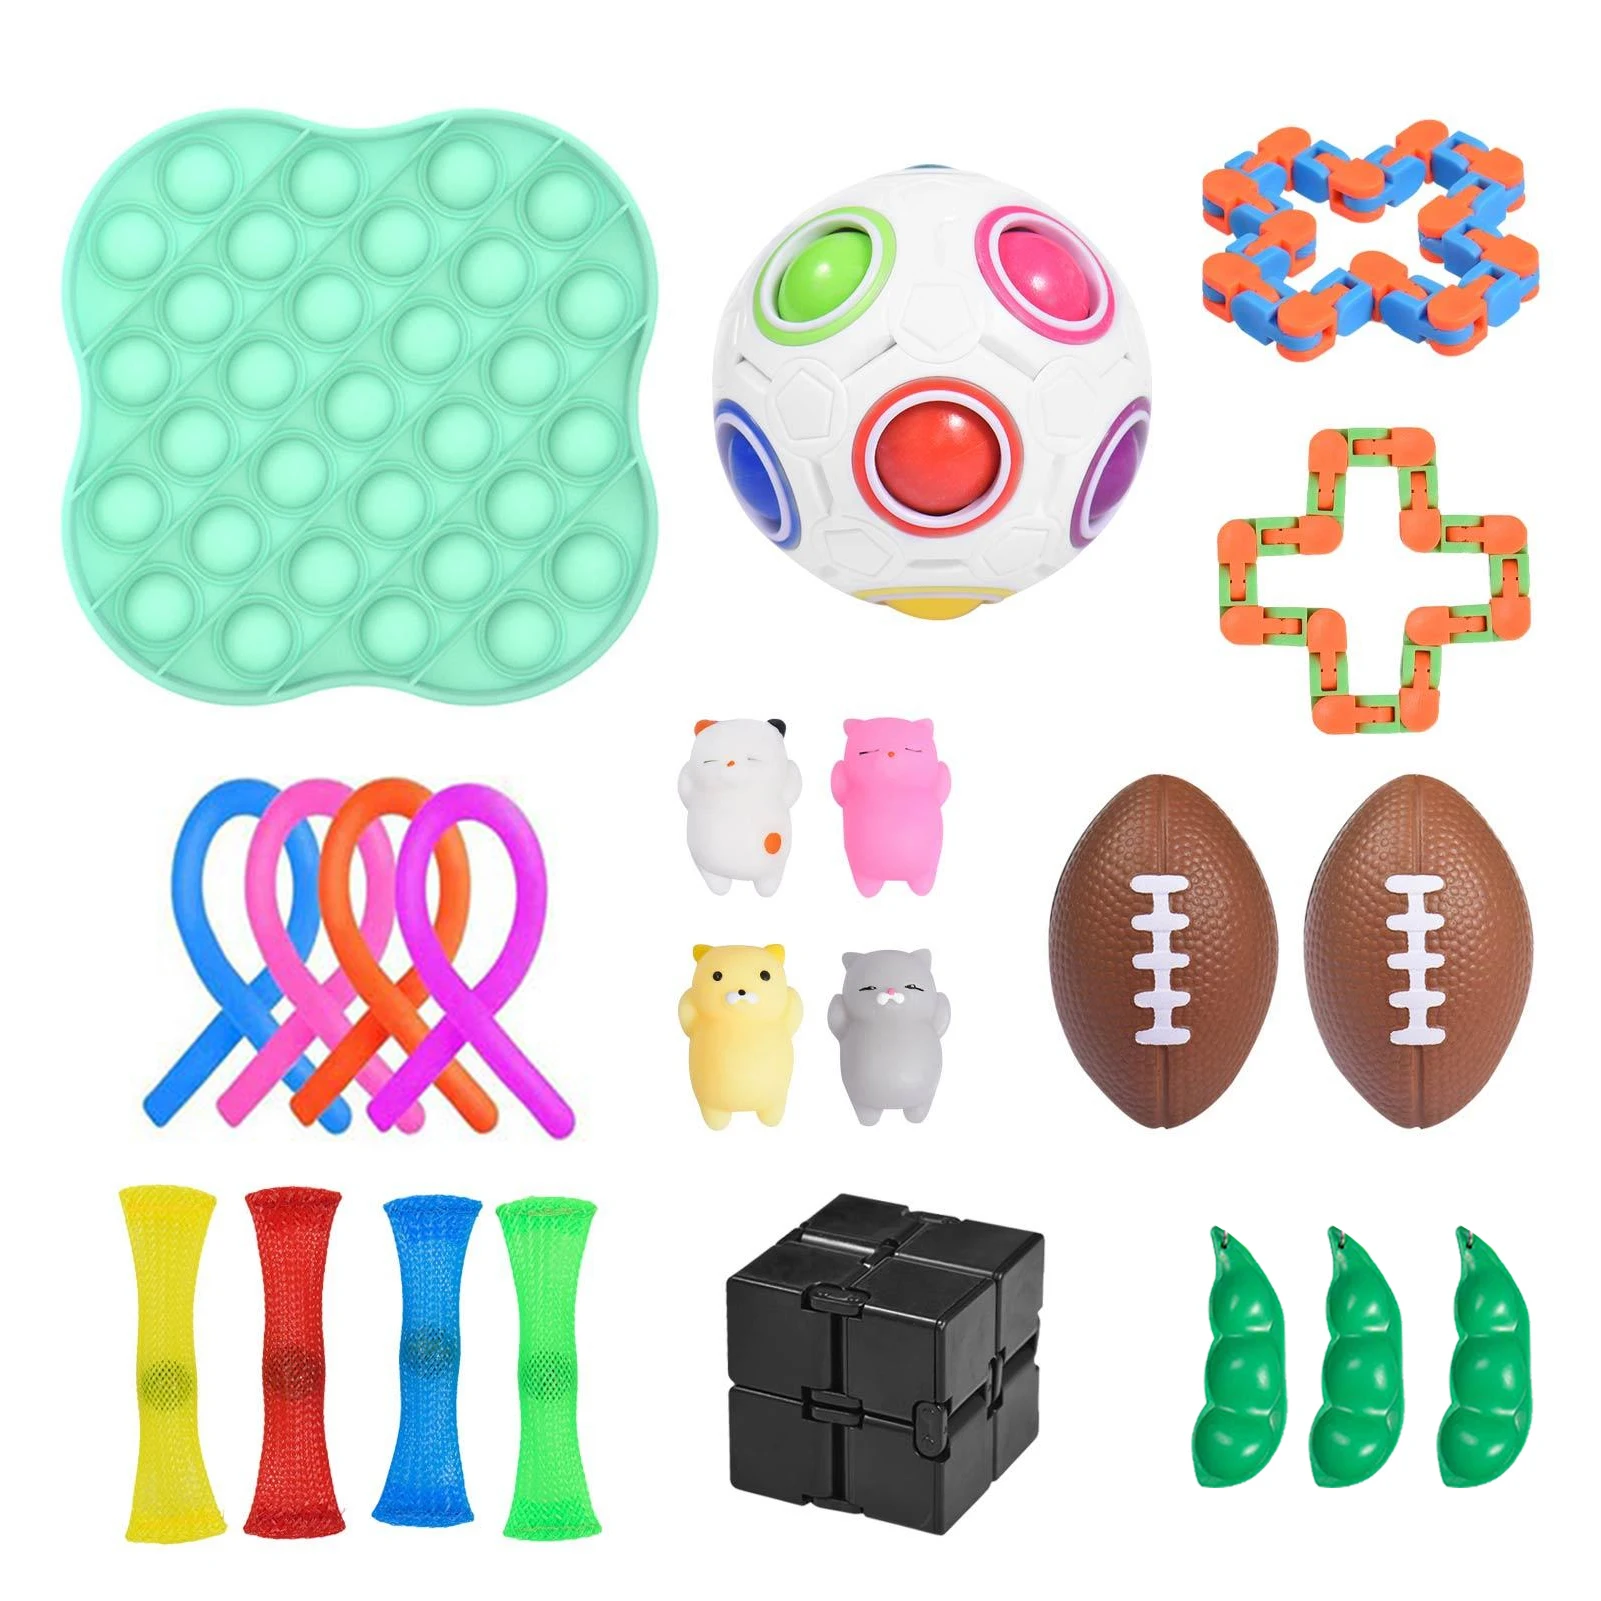 

22 Pcs Fidget Sensory Toy Pendant For Office Toy Decompression Toys Set Stress Relief Toys For Kids Adults Autism Special Need